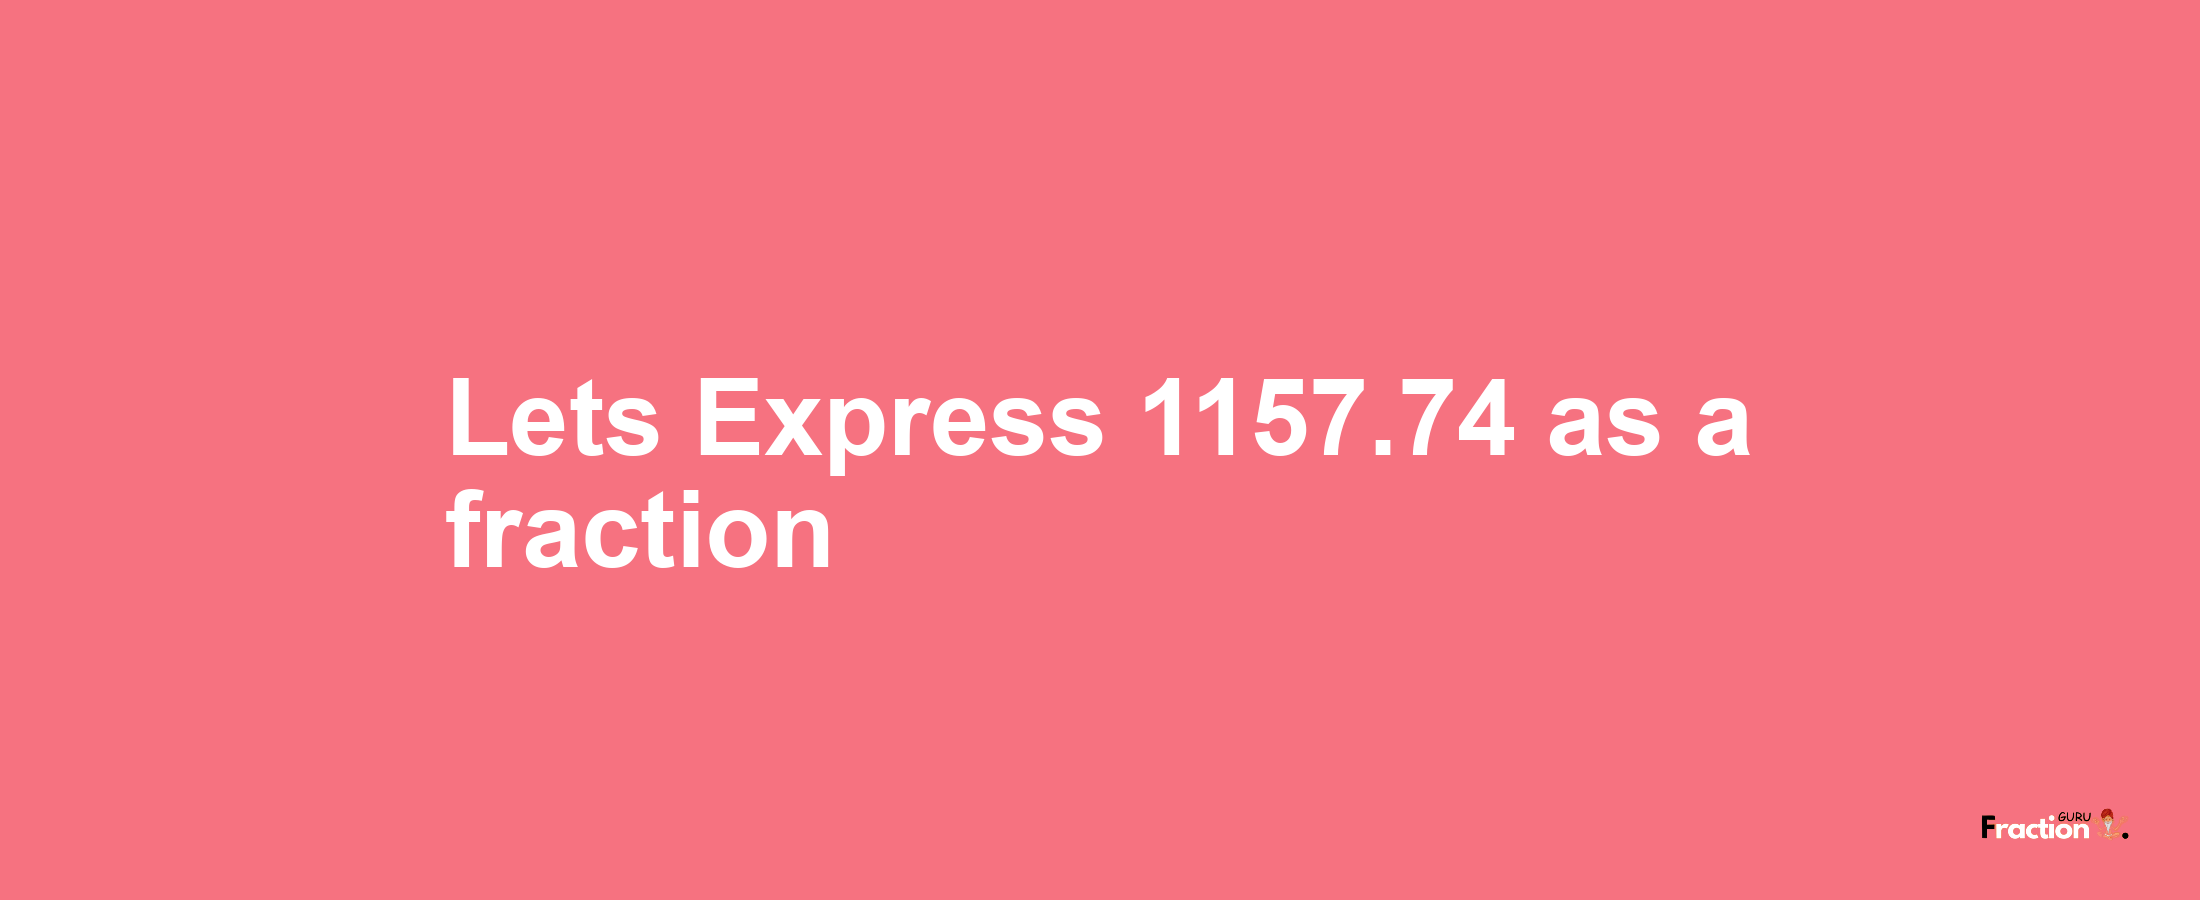 Lets Express 1157.74 as afraction